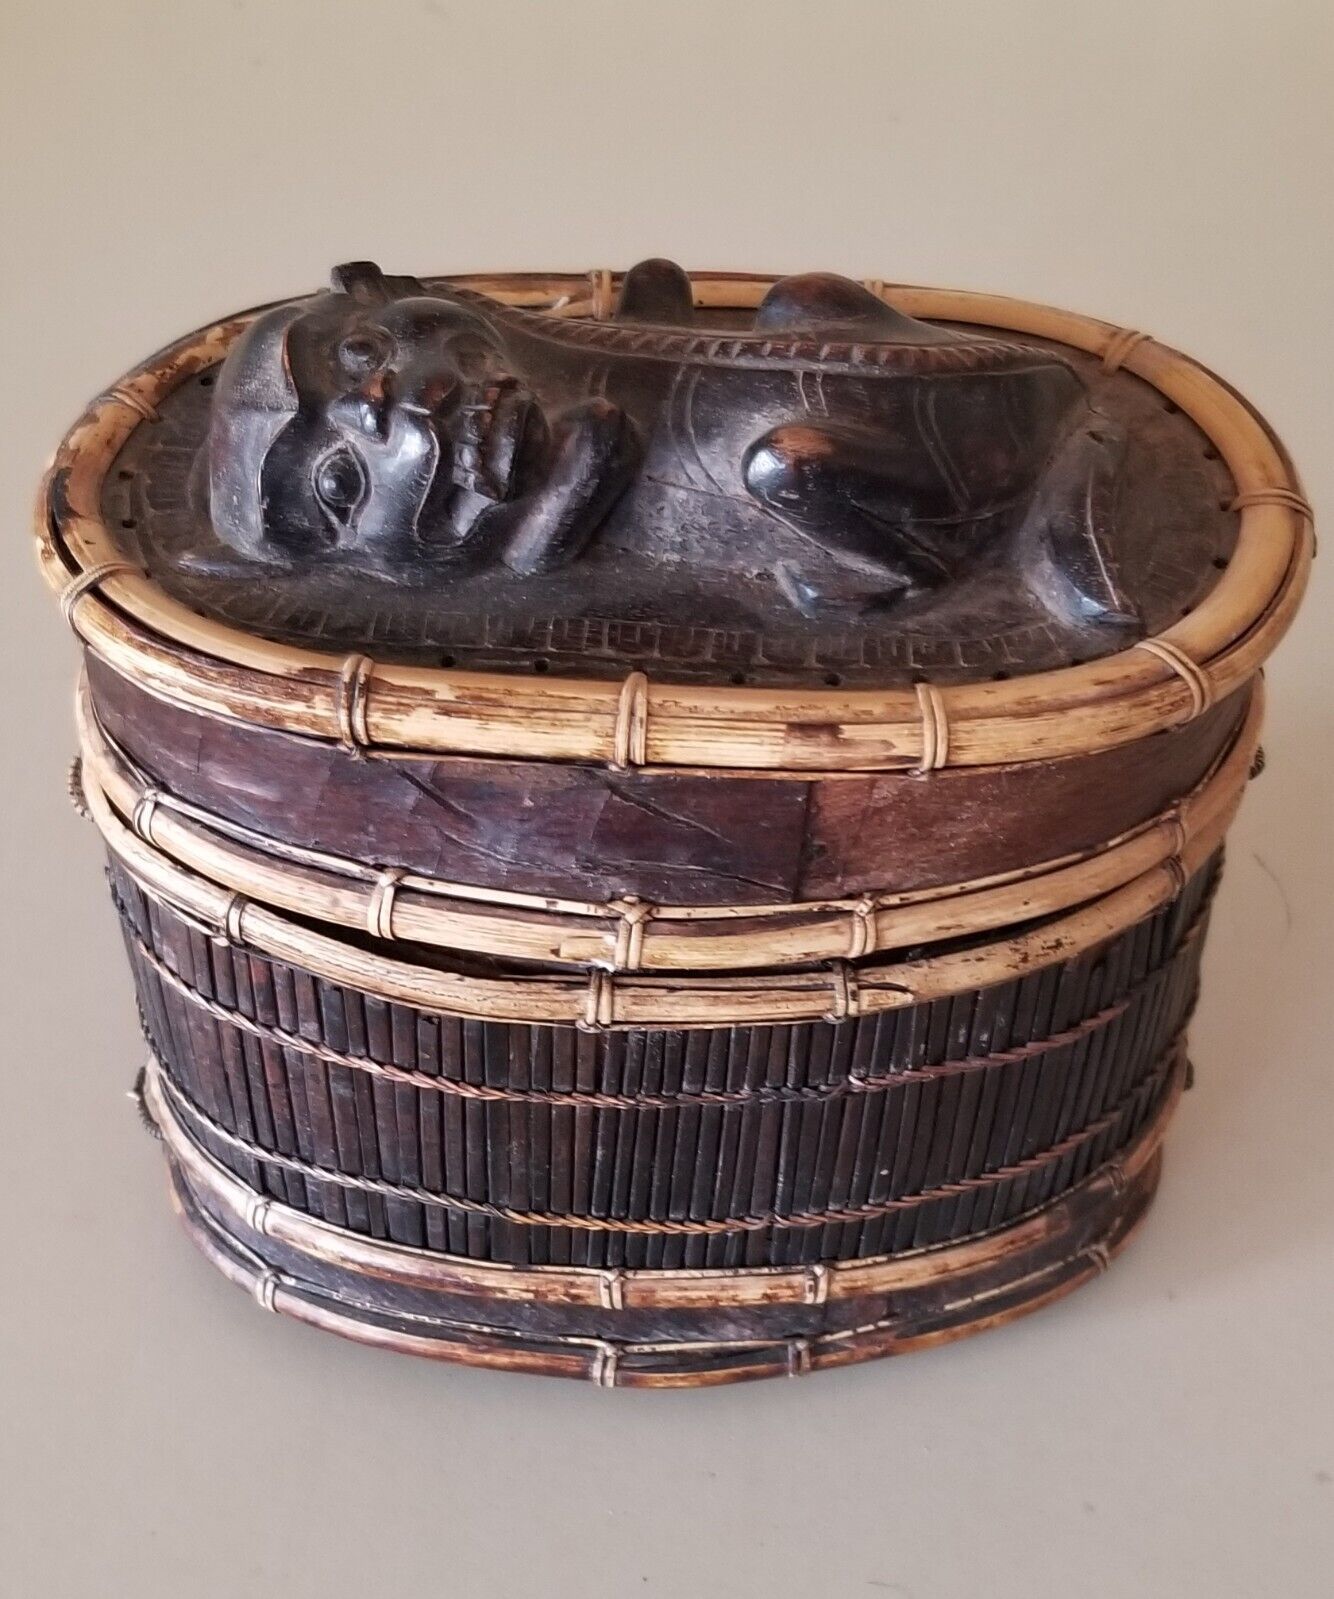 Indonesian/Balinese? Handcrafted Wooden Carved Lombok Container Box. [B1]